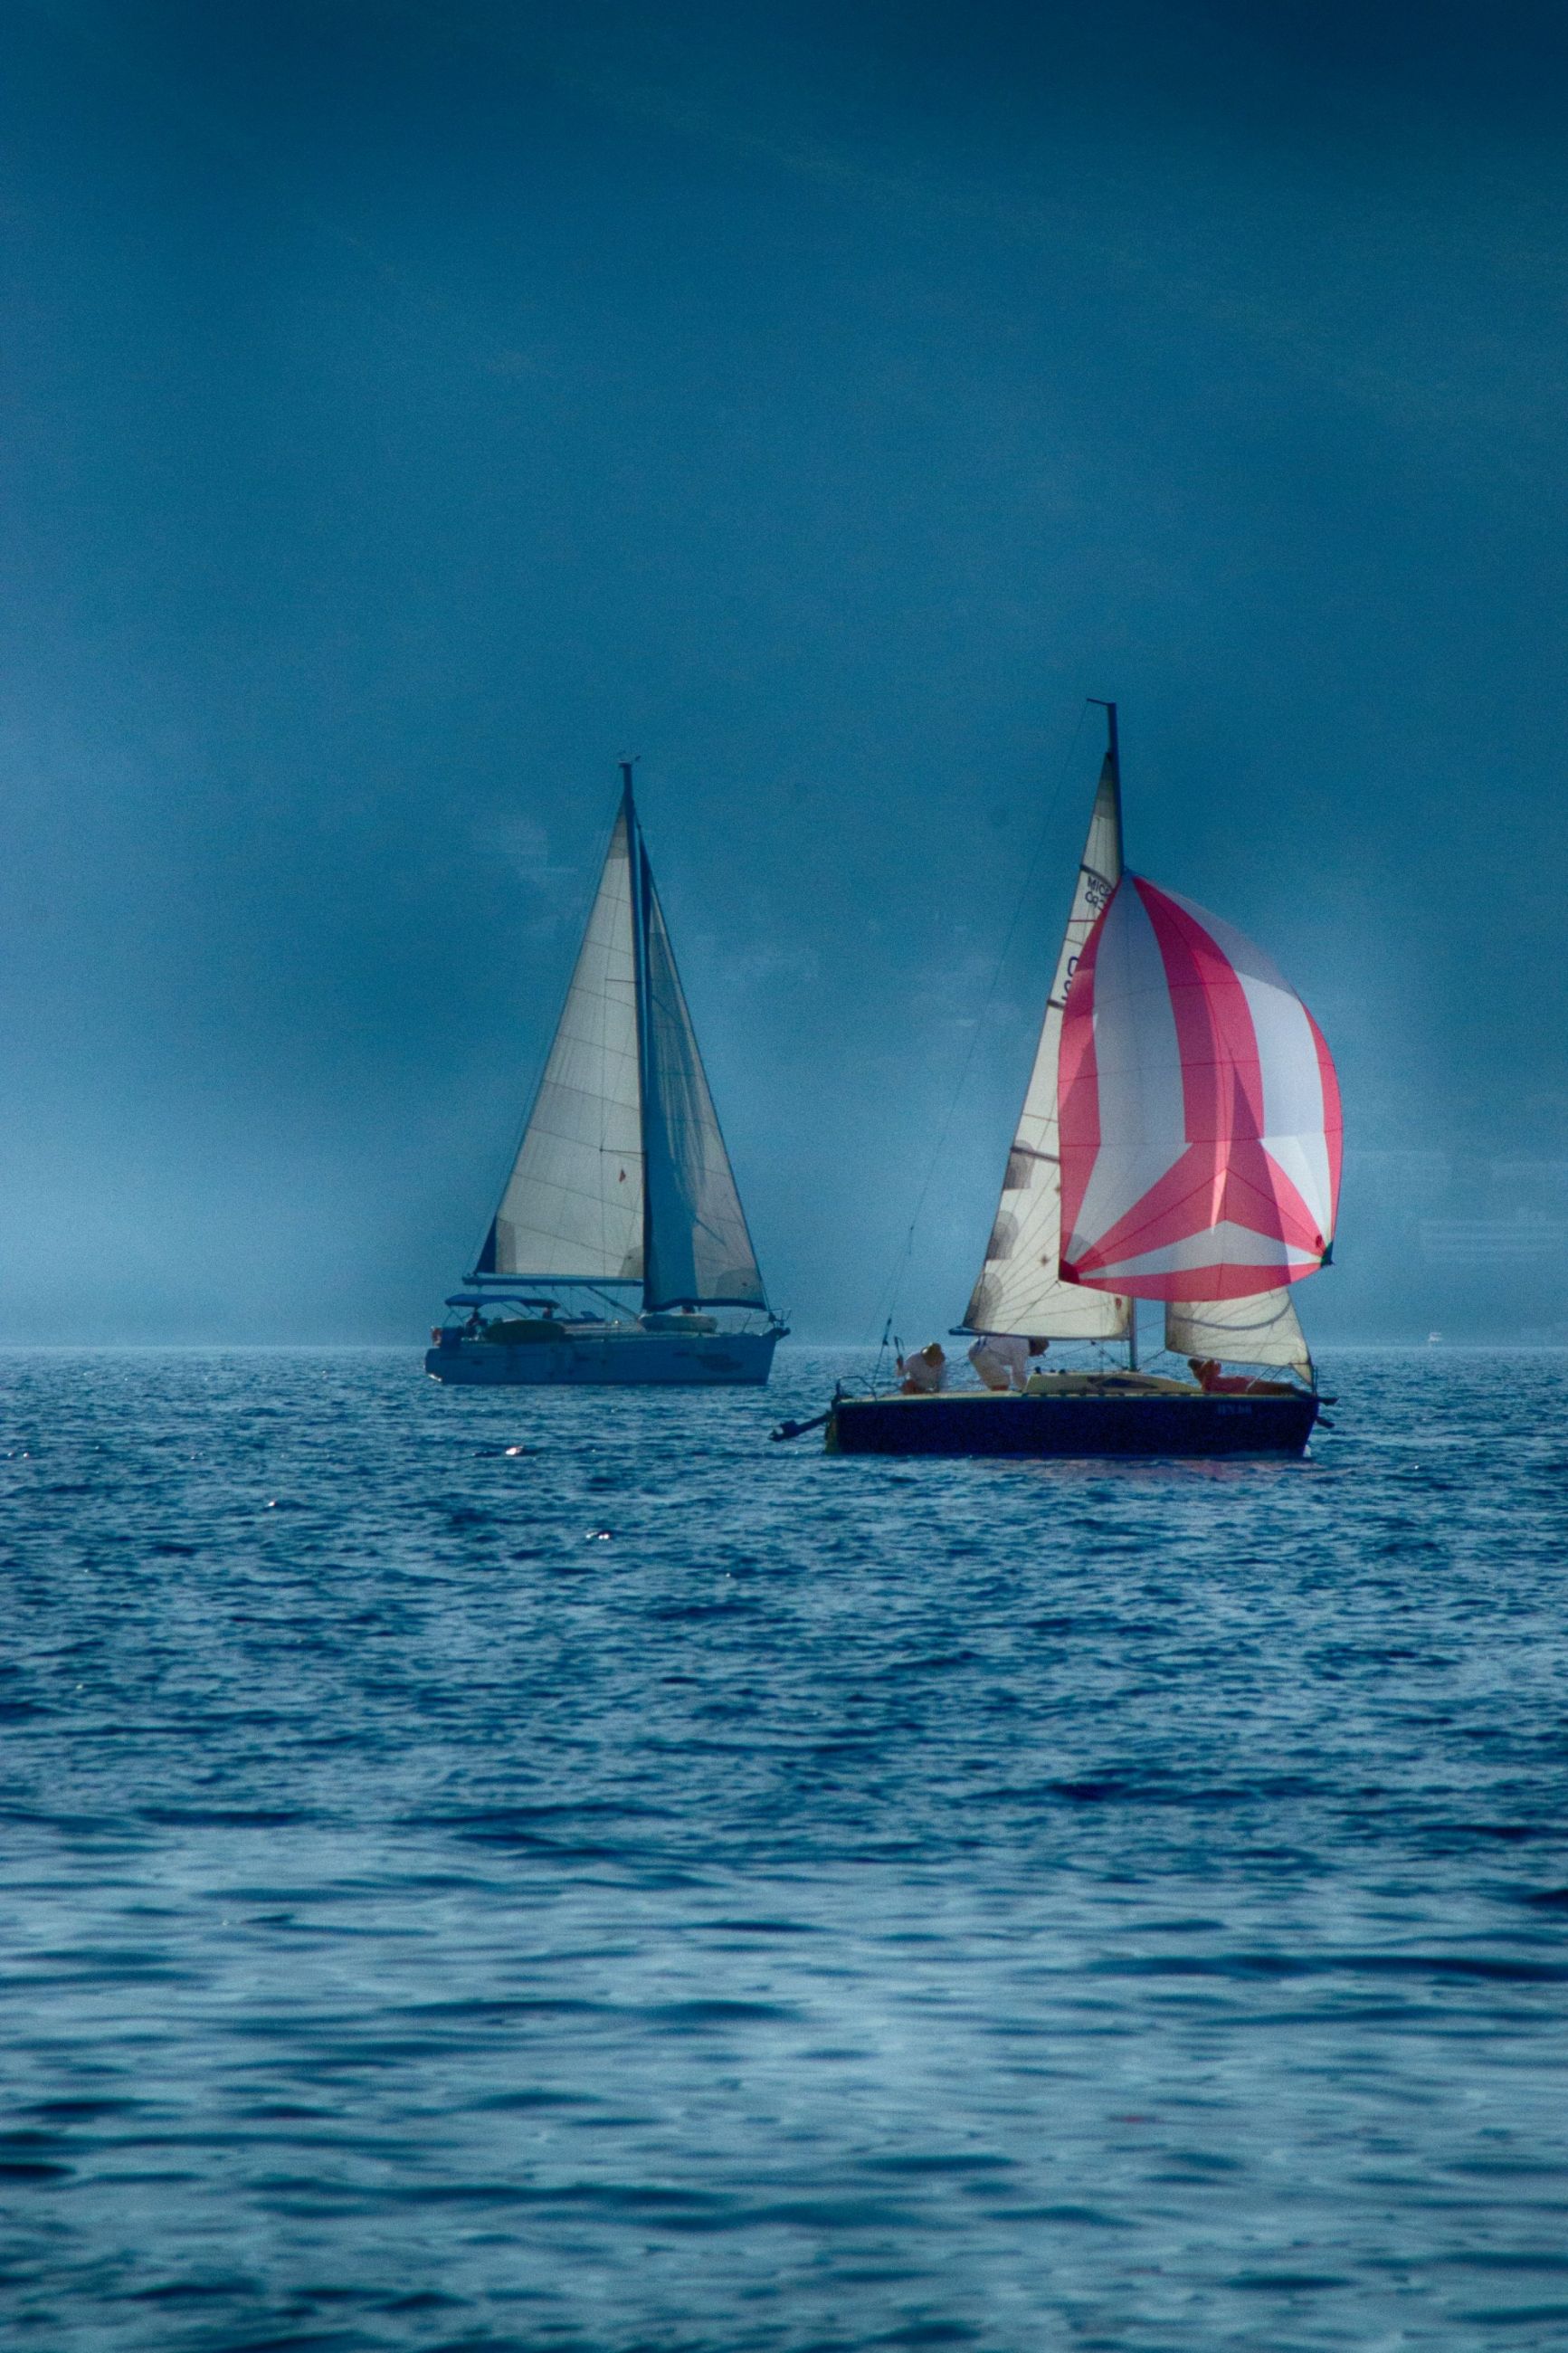 Sailing in the bay